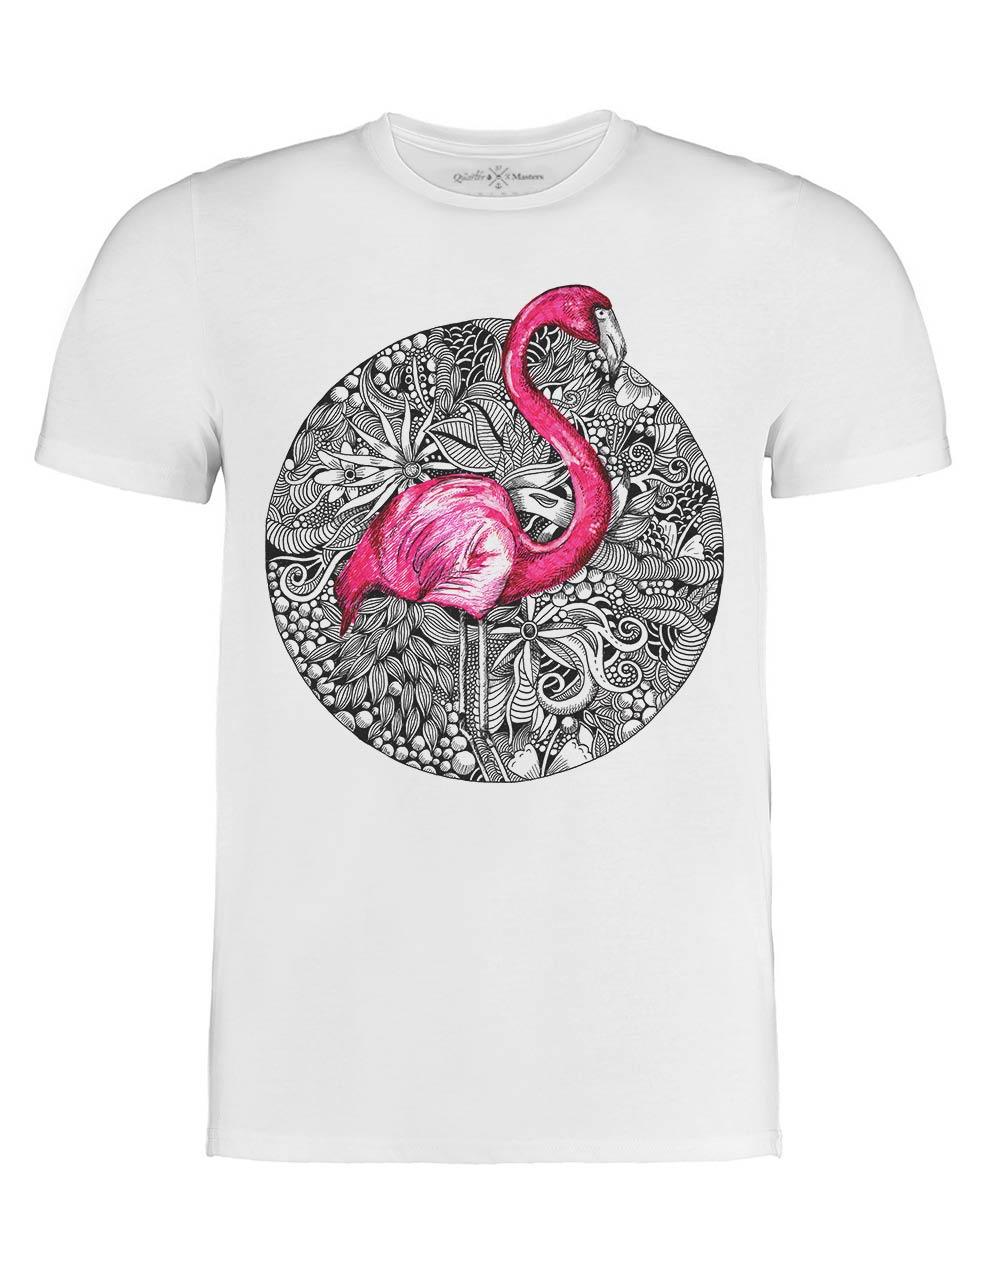 Flamingo T-shirt by Squidoodle